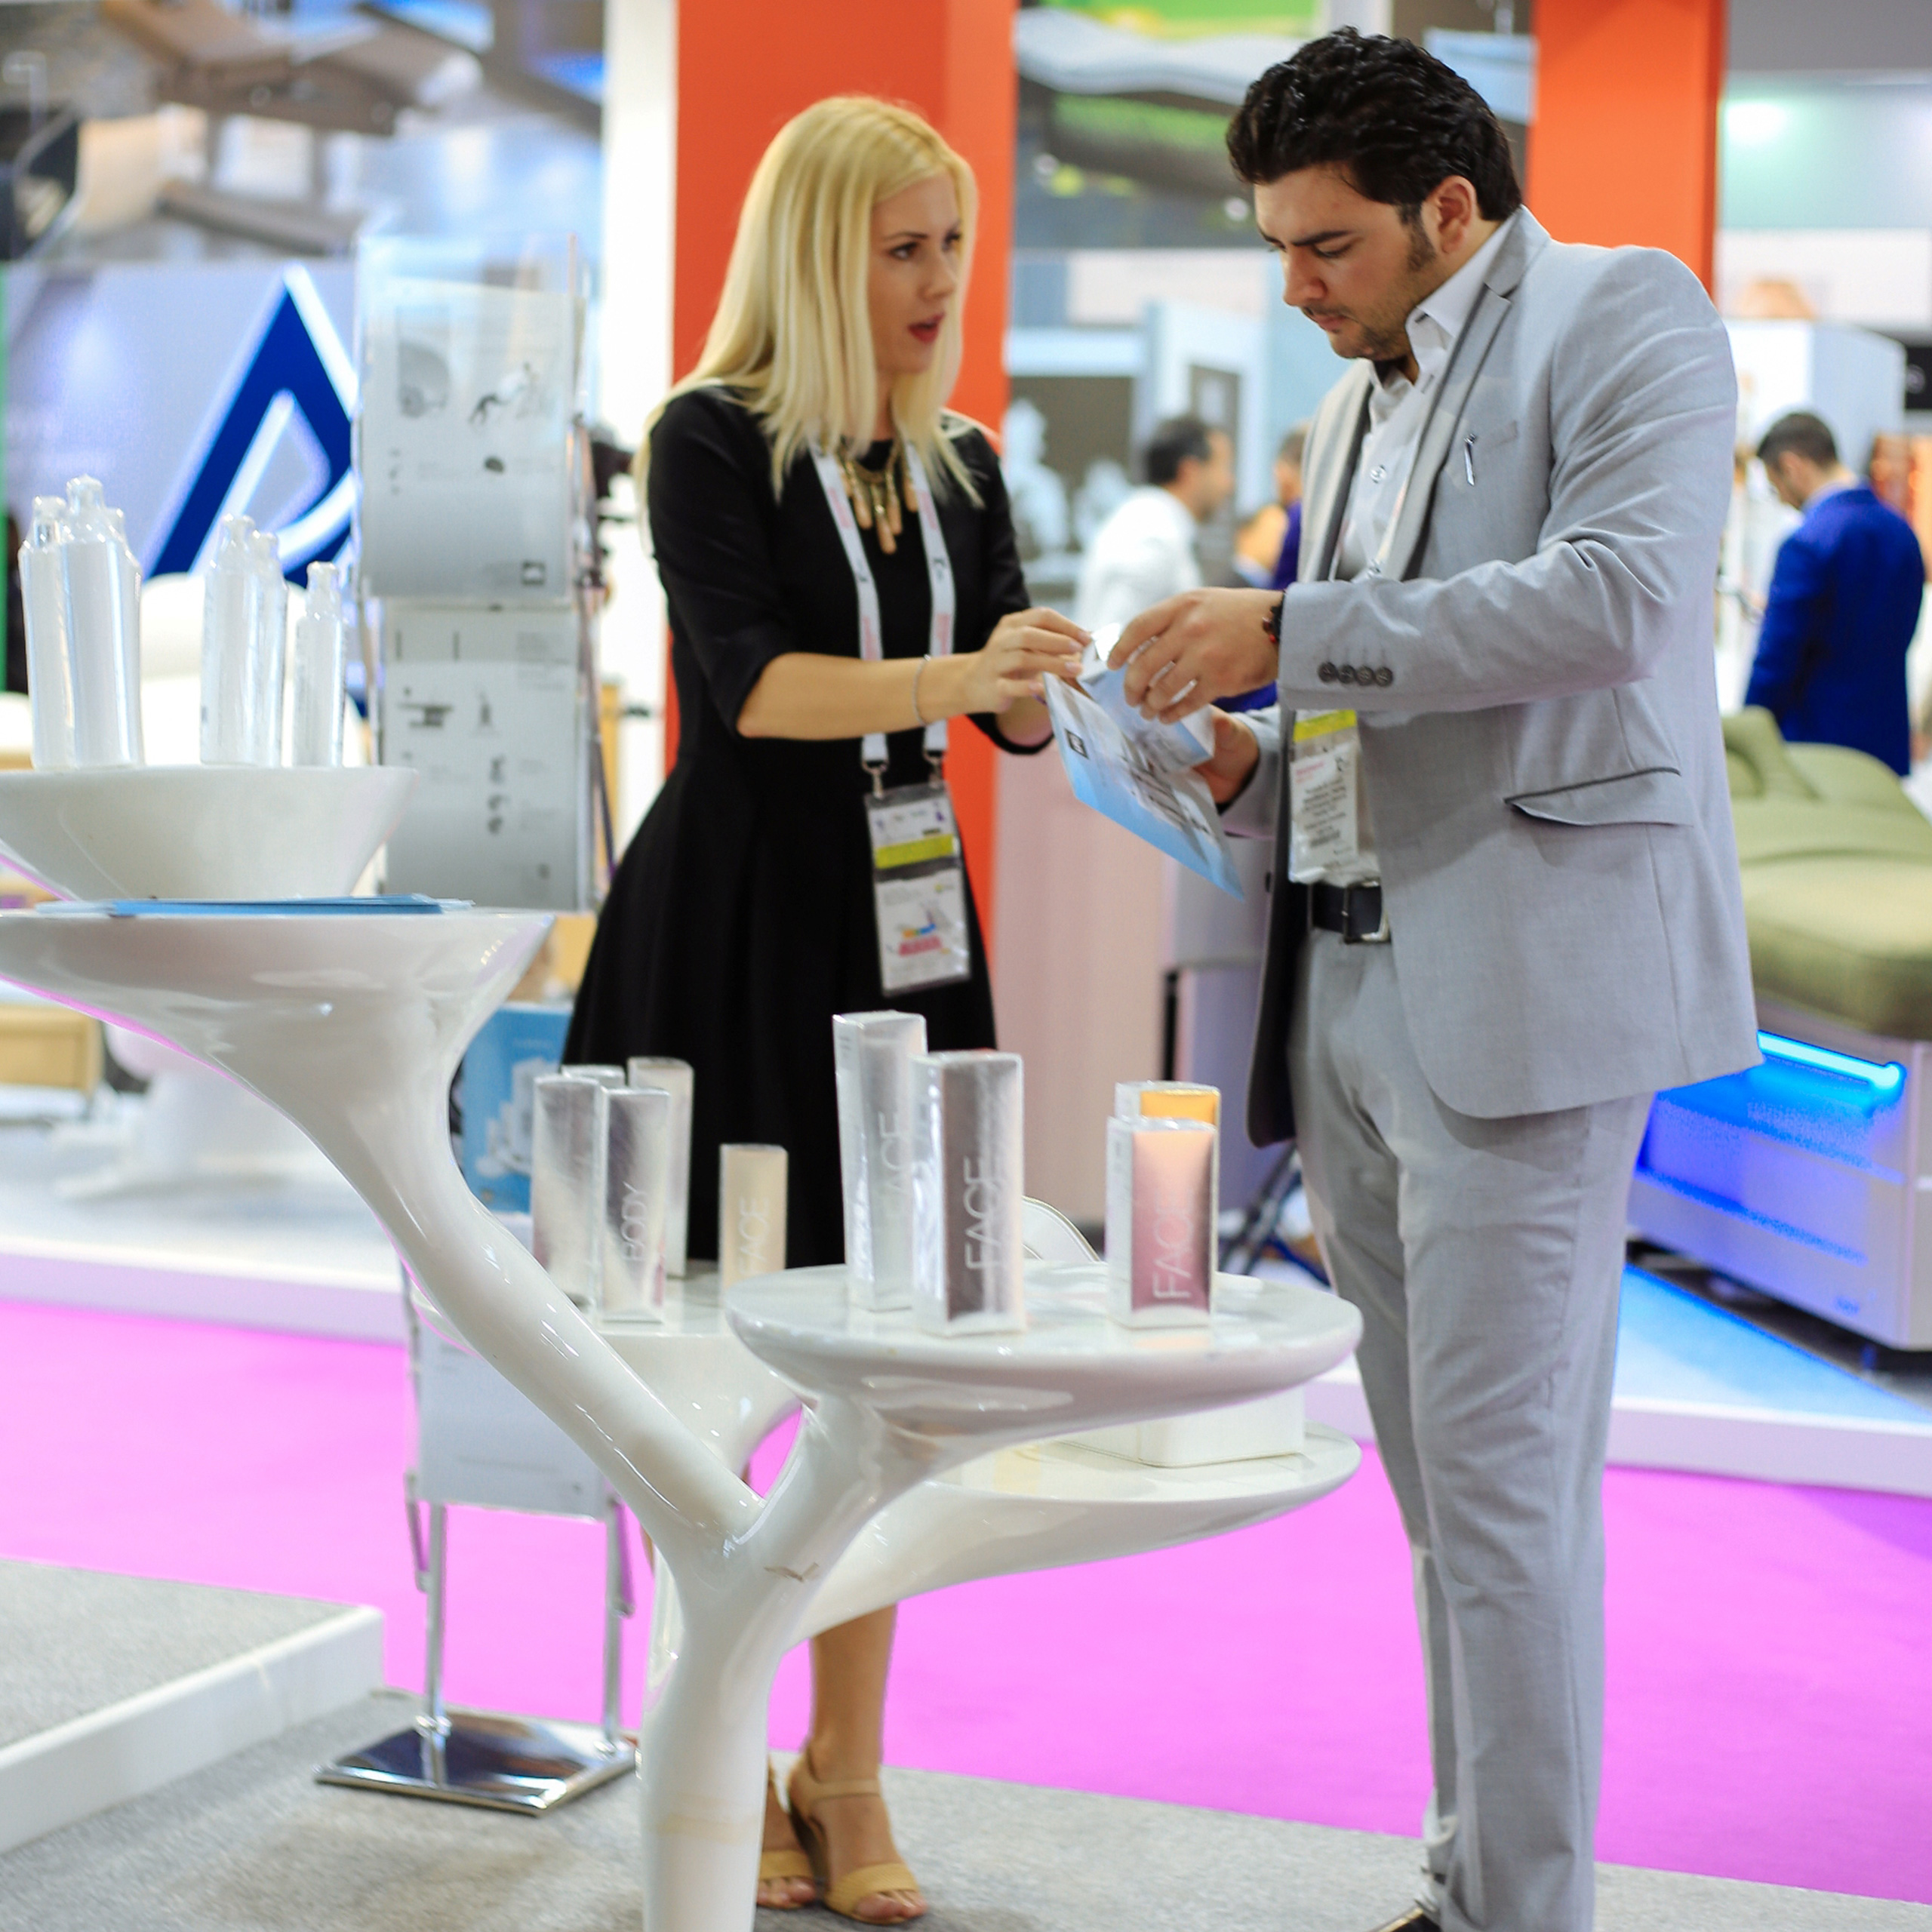 Beautyworld Middle East - Spending on GCC beauty and personal care surges ahead, estimated at US$9.3 billion in 2016 – Euromonitor